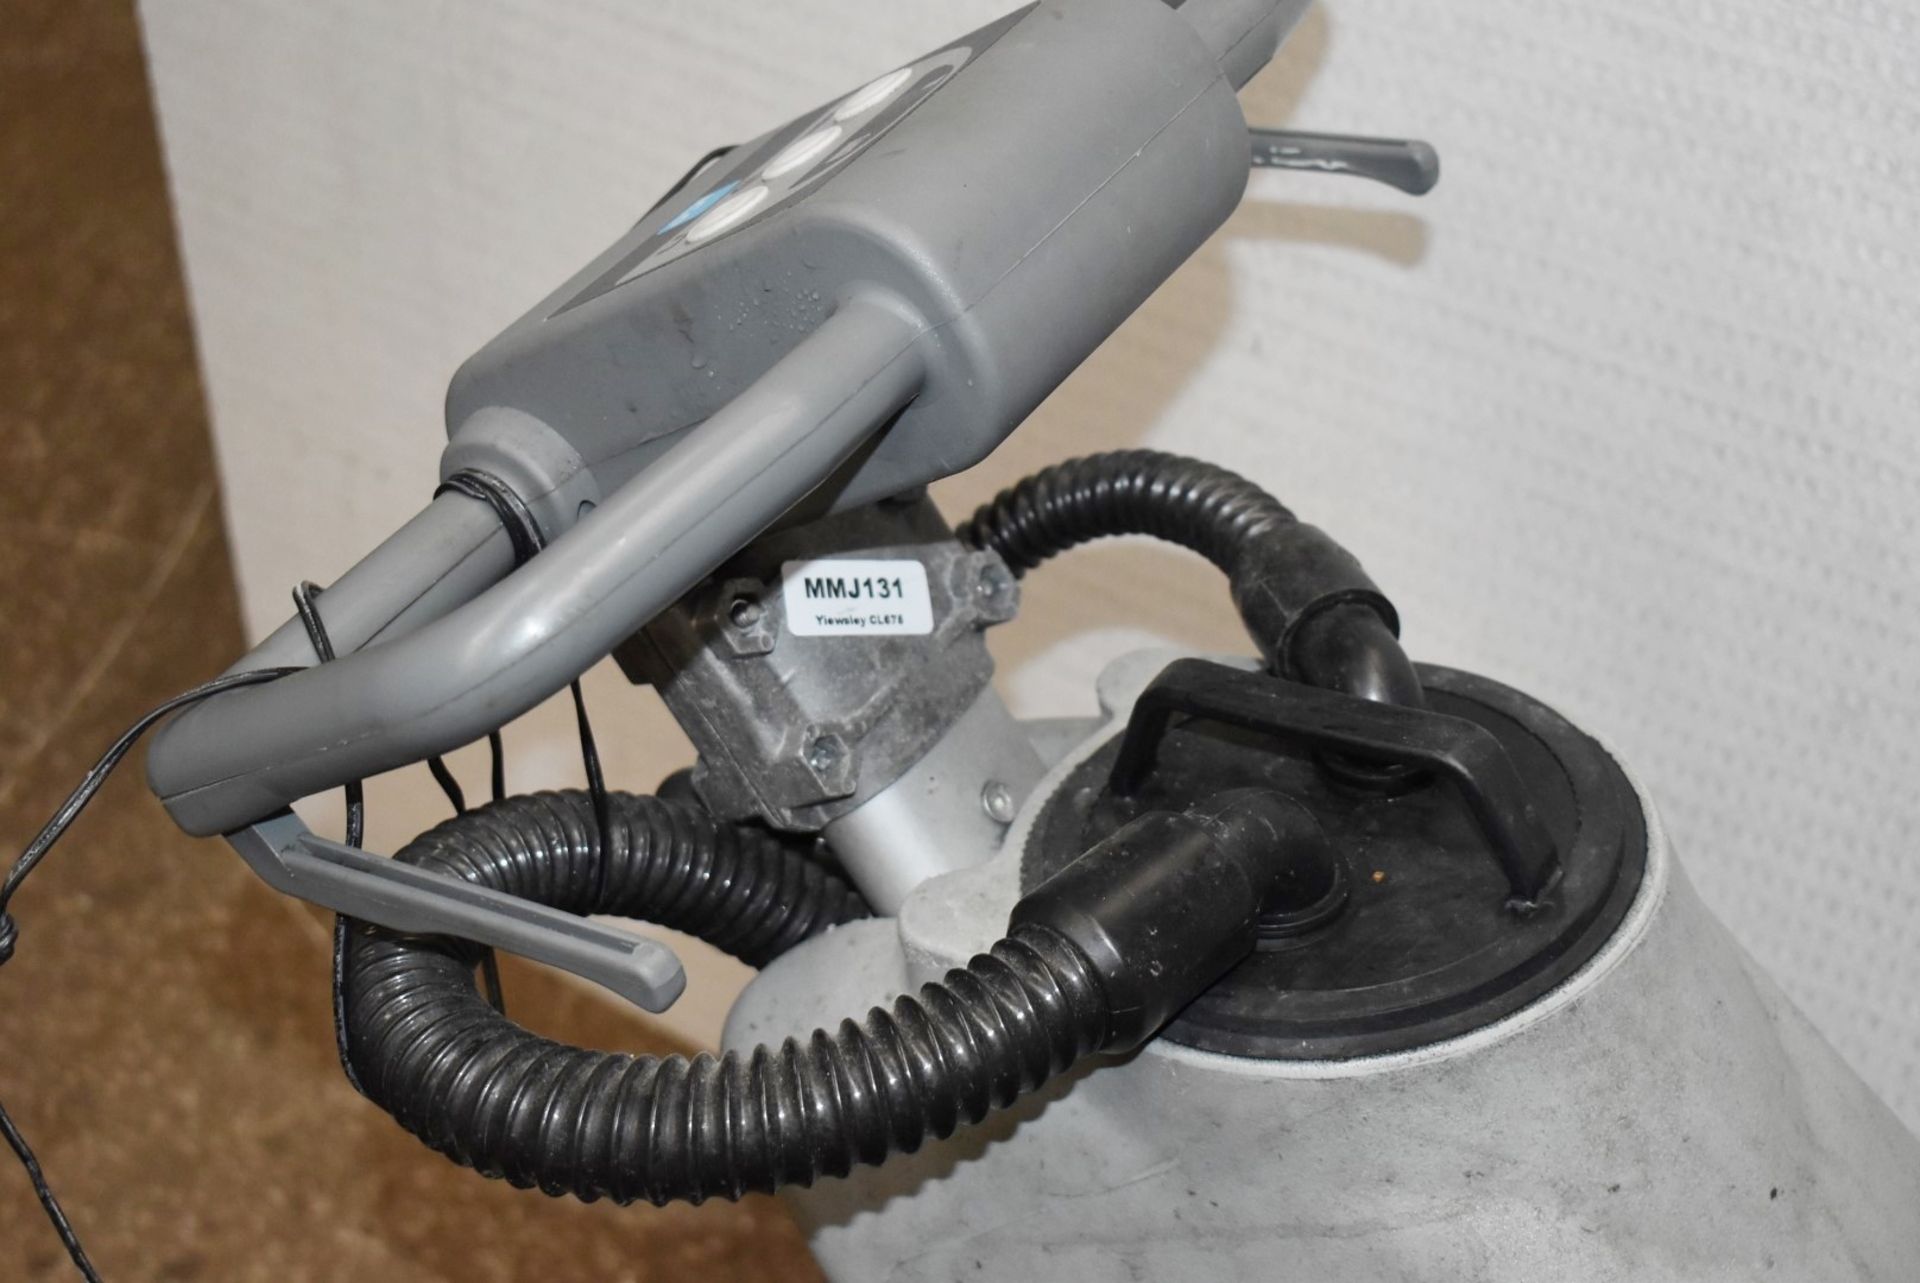 1 x Ice Scrub 35D Compact Floor Scrubber - Recently Removed From a Supermarket Environment Due to - Image 8 of 15